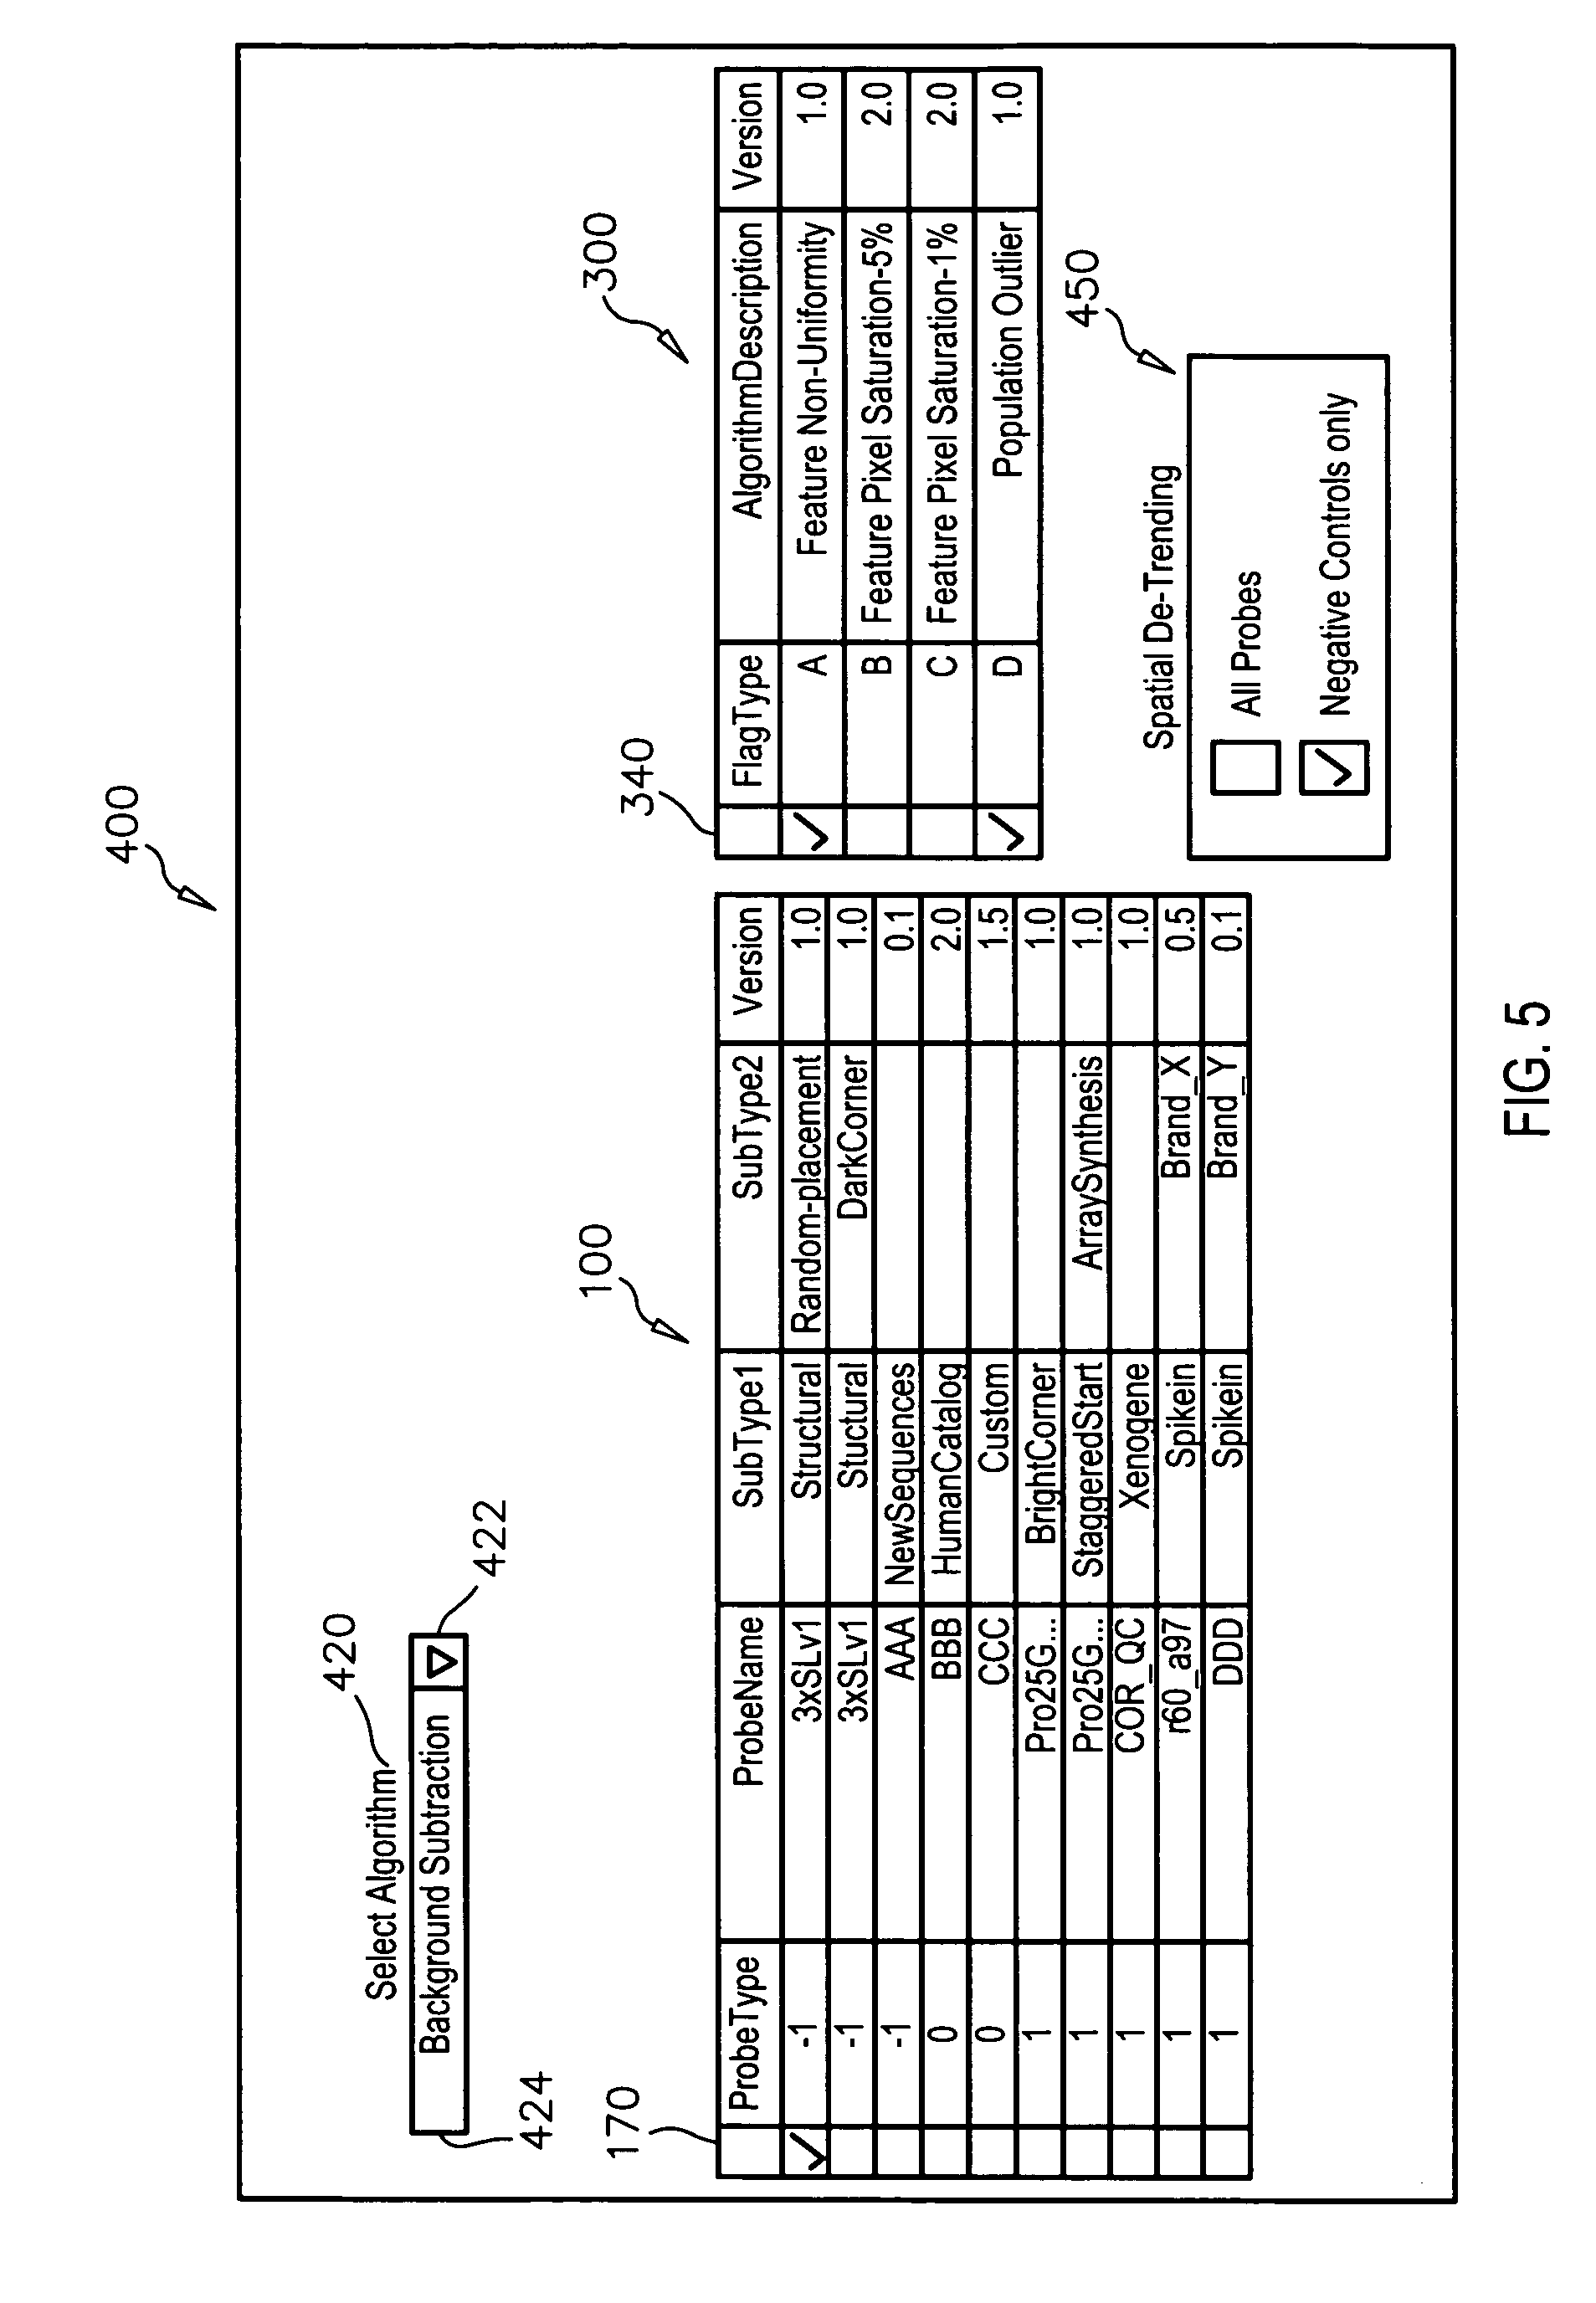 Customized and dynamic association of probe type with feature extraction algorithms